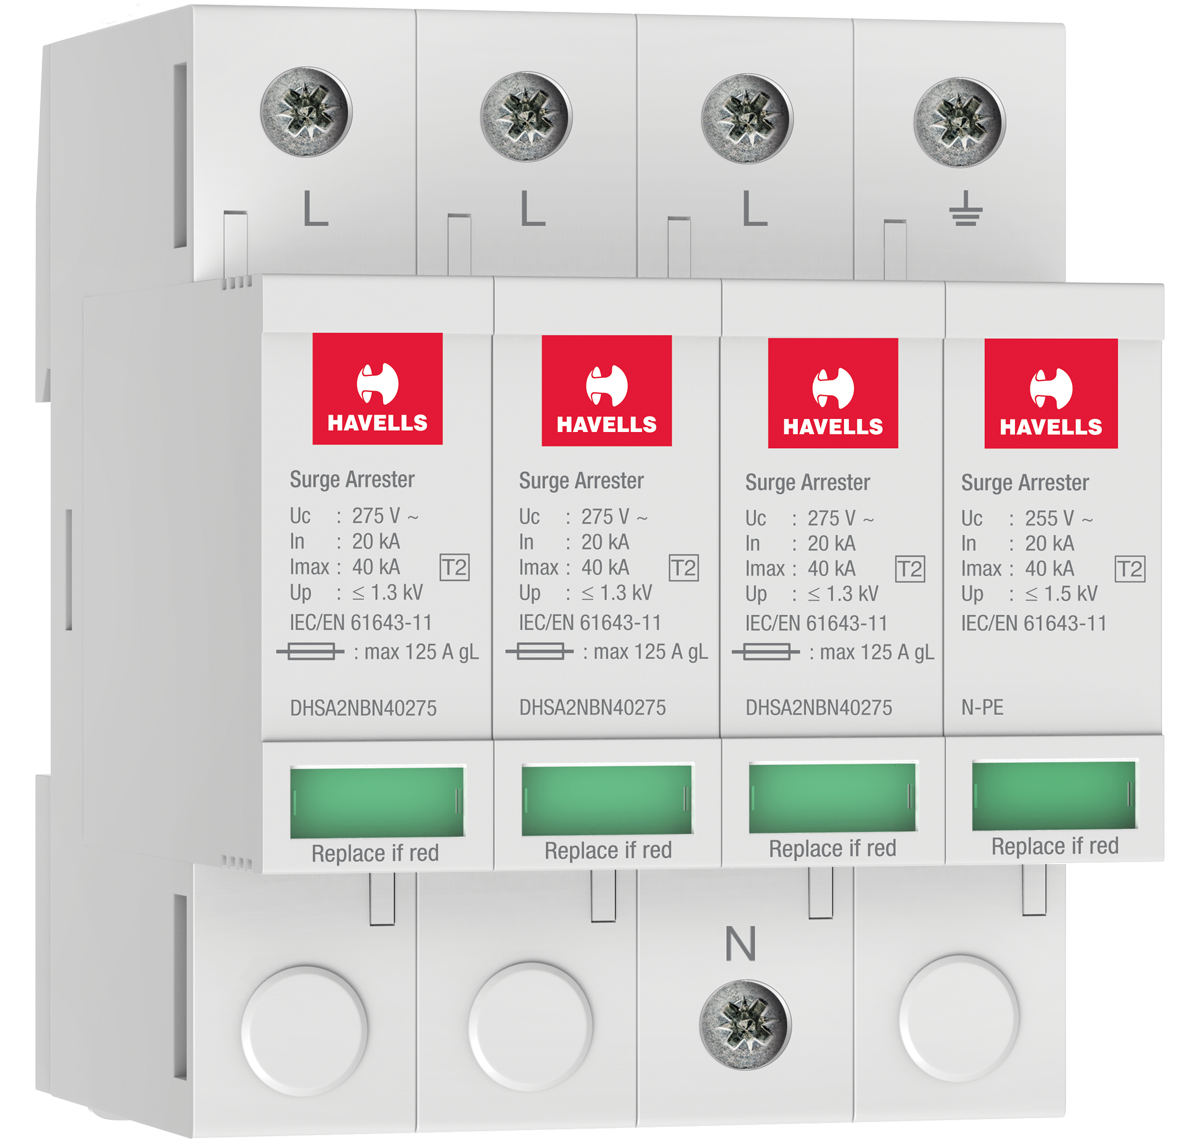 Type 2 AC Surge Protection Device